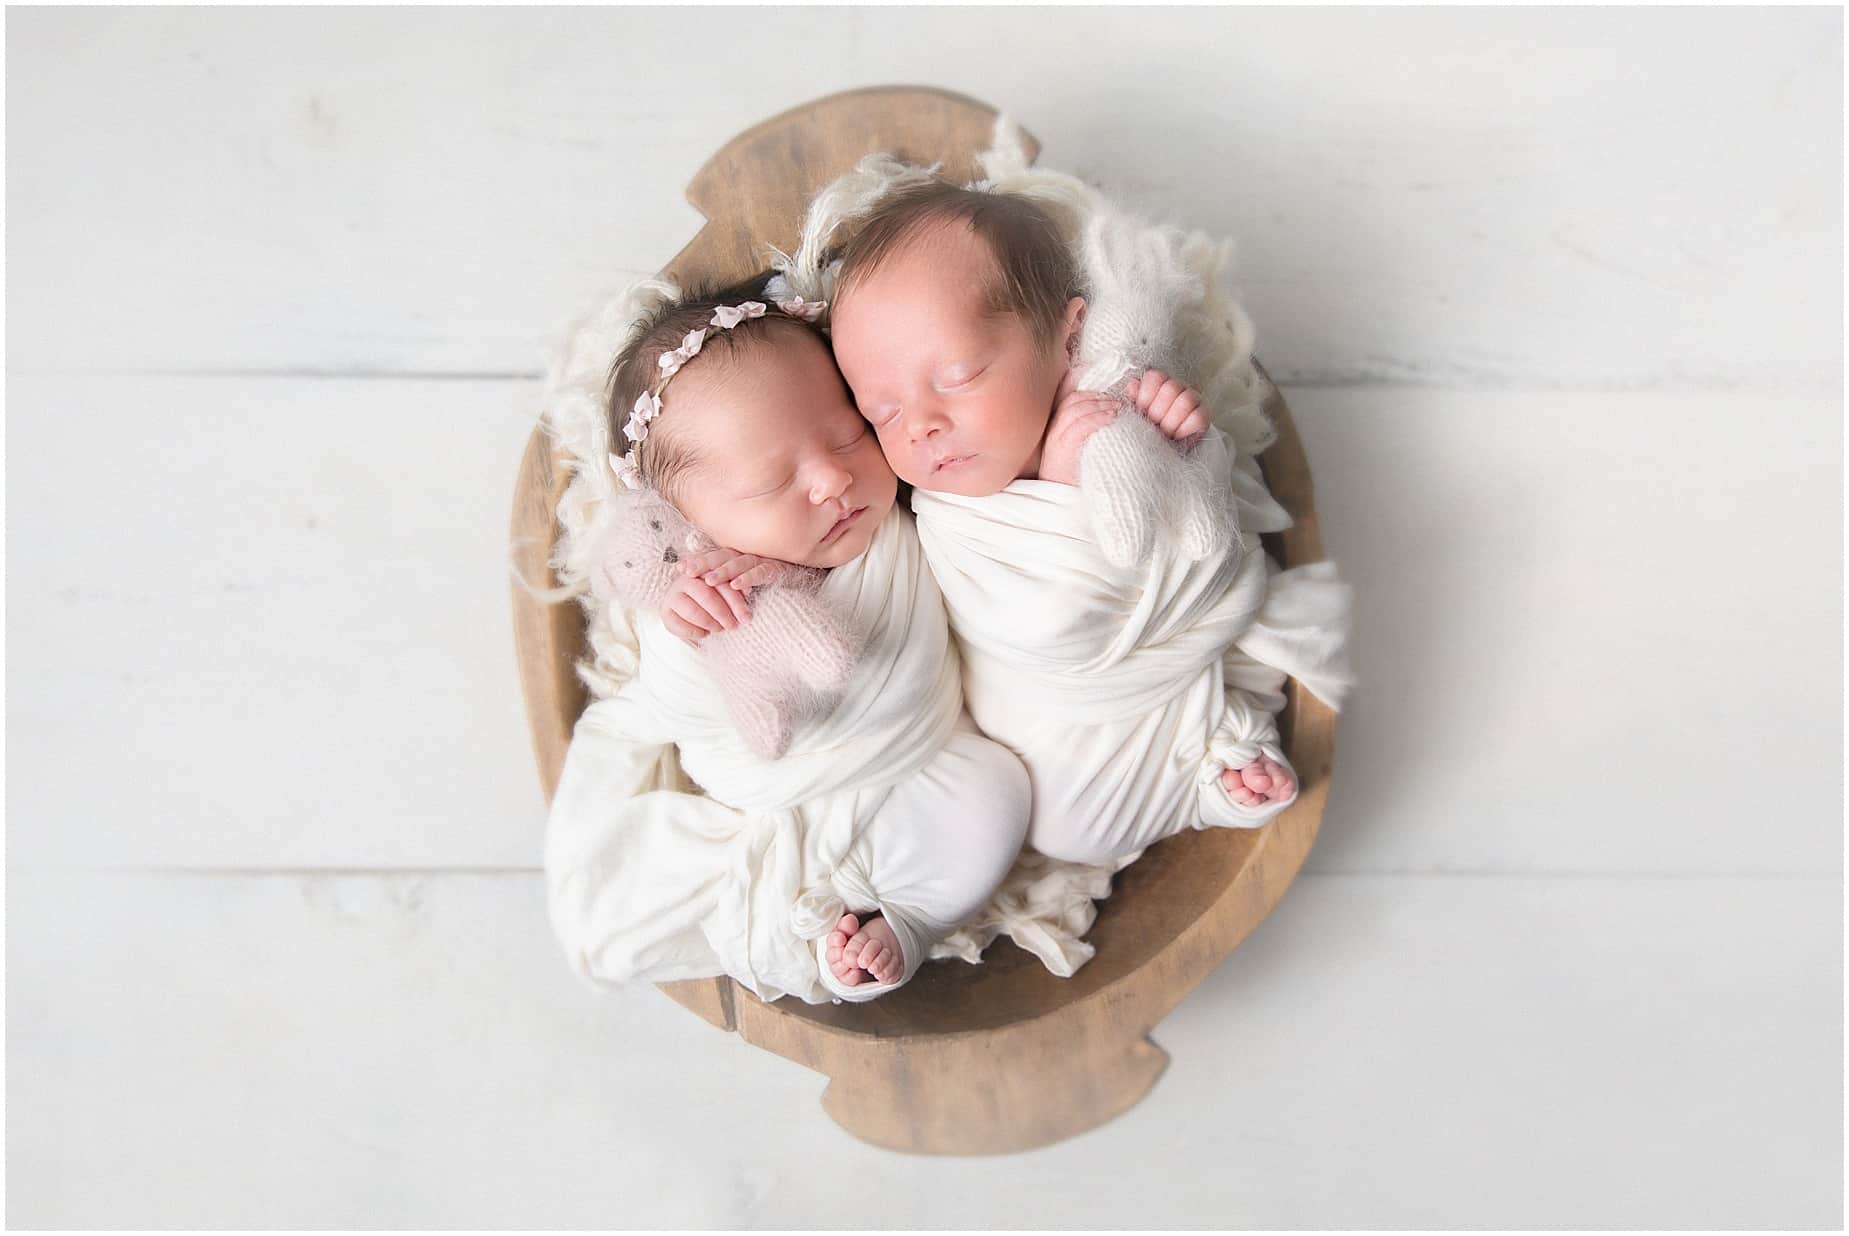 Photos of Newborn Twins swaddled in white snuggling in a bowl holding bunnies in Jupiter photography studio 